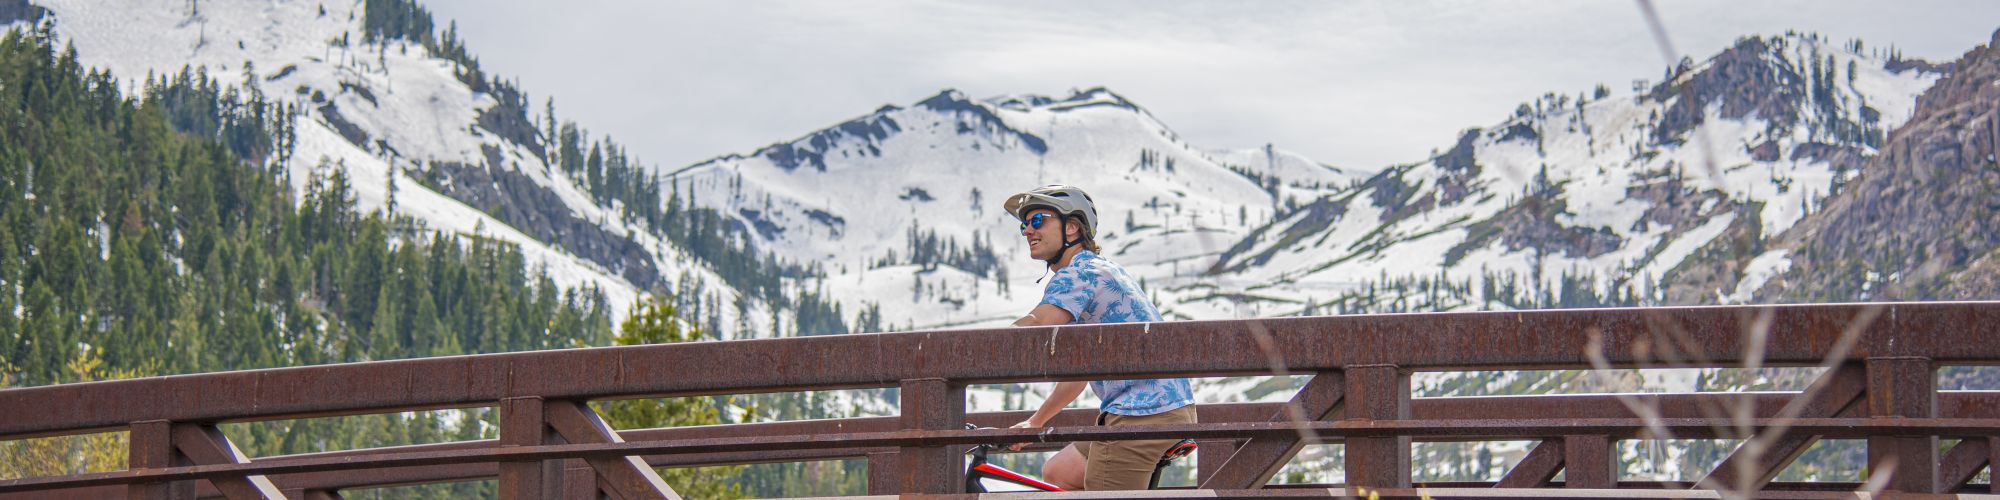 A person is riding a bicycle on a wooden bridge with snow-capped mountains in the background and a partly cloudy sky.